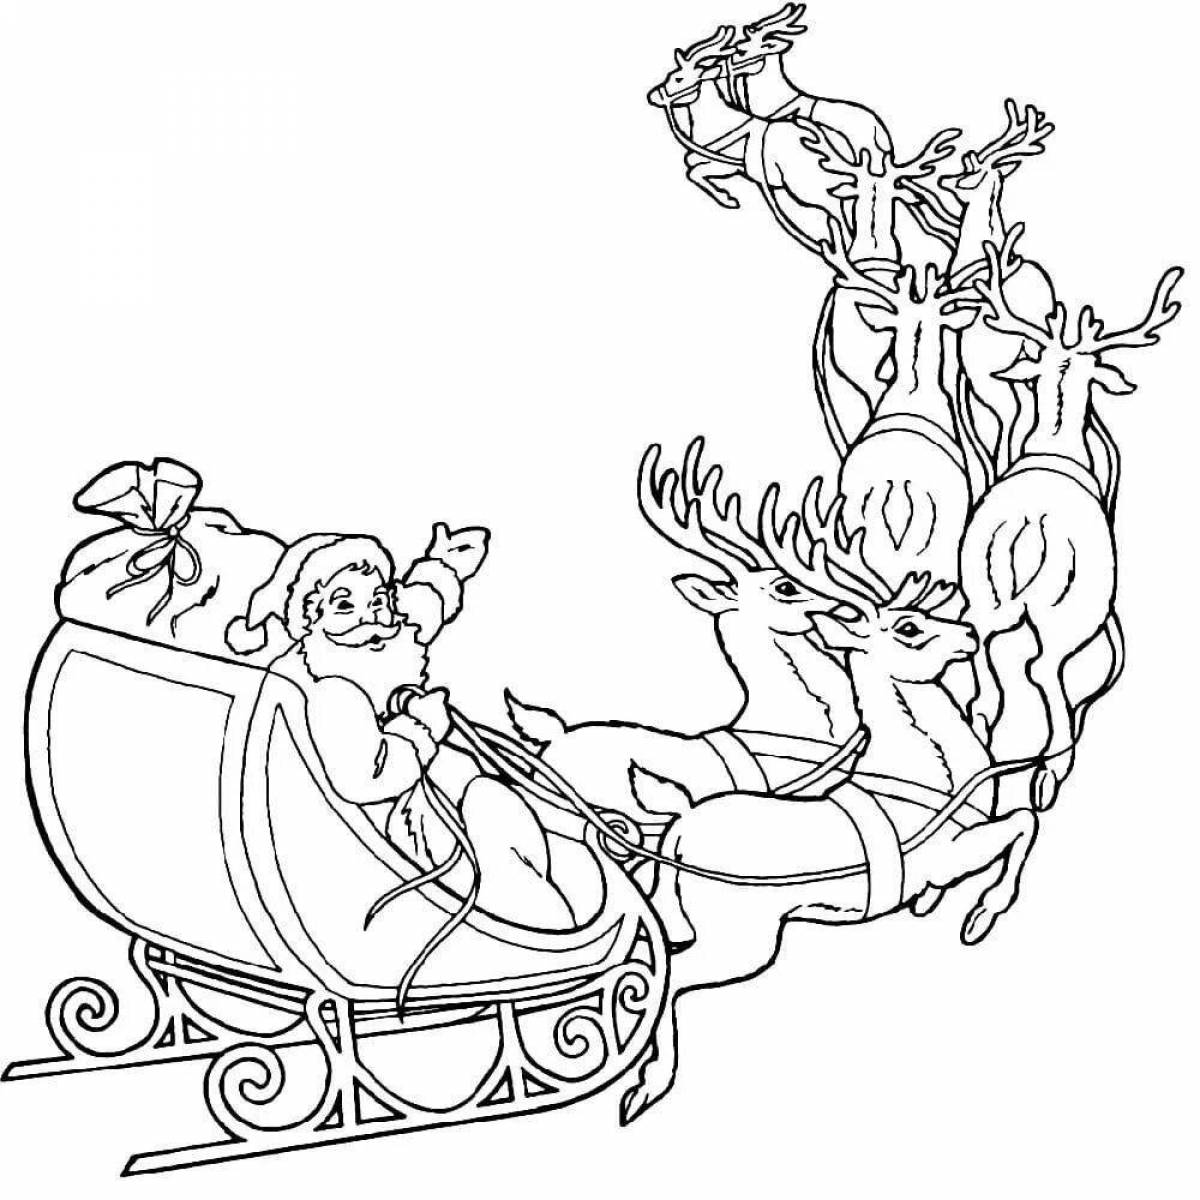 Coloring book cheerful Santa Claus on a sled